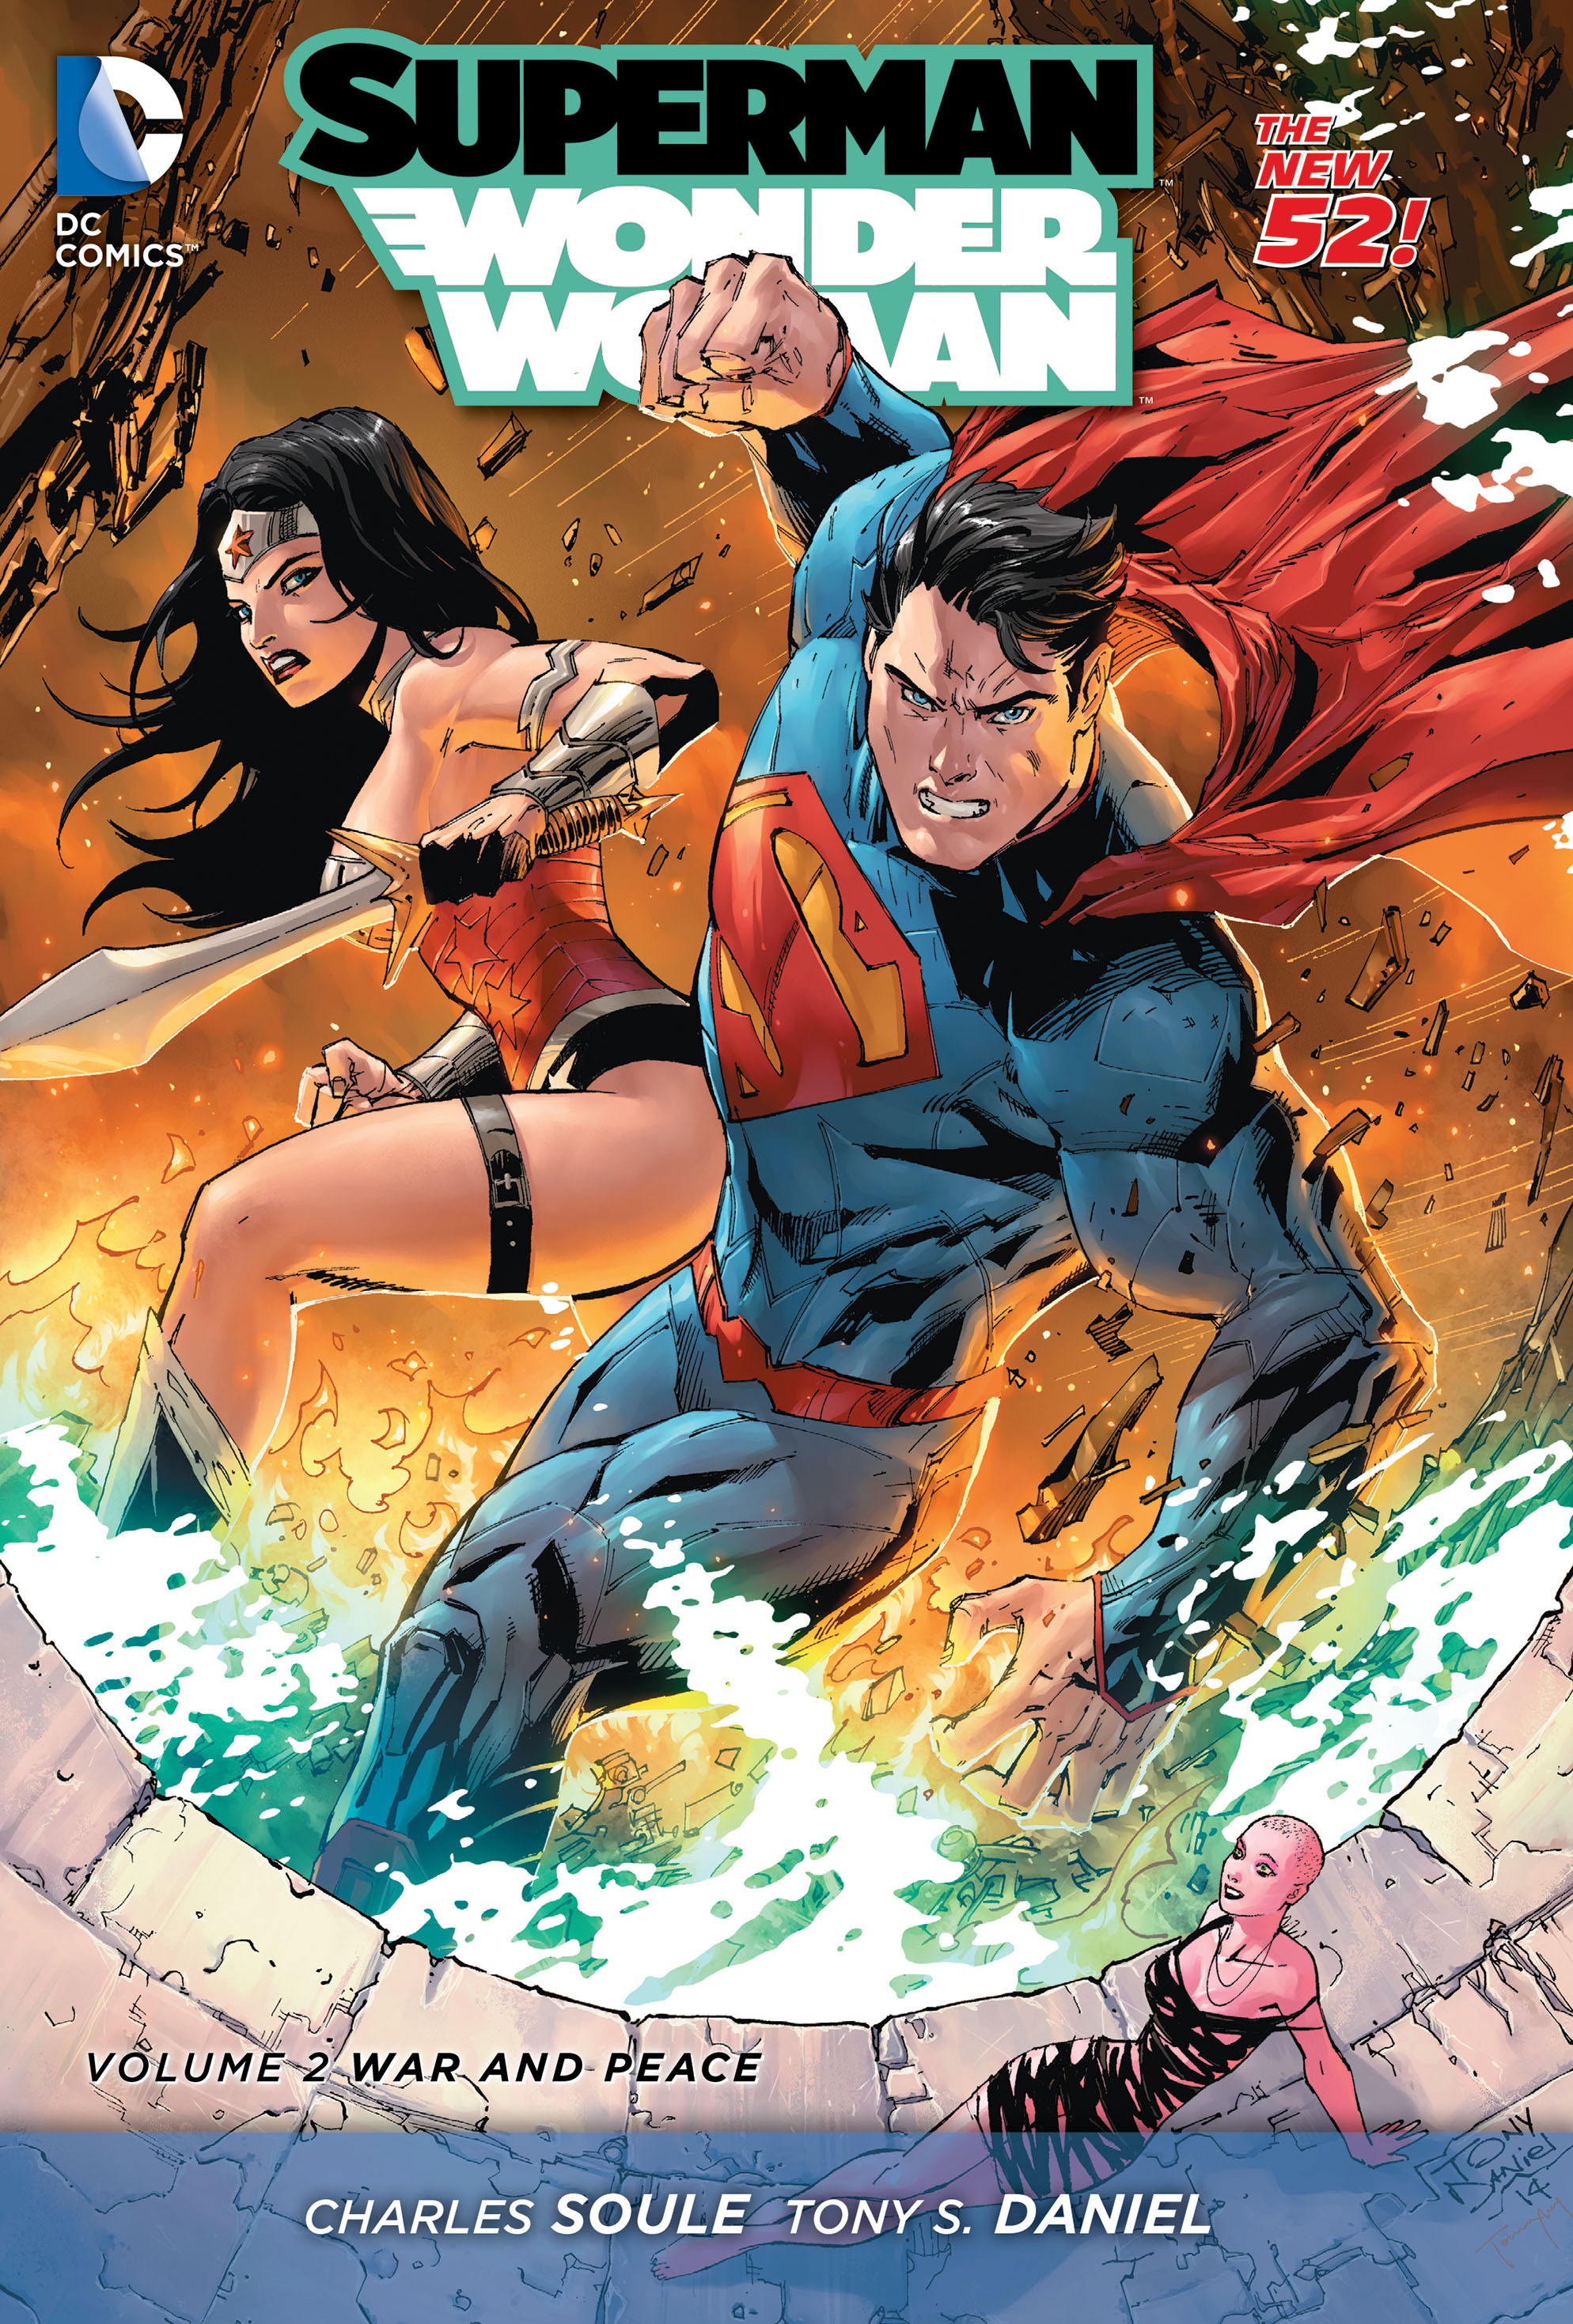 Read online Superman/Wonder Woman comic -  Issue # _TPB 2 - War and Peace - 1